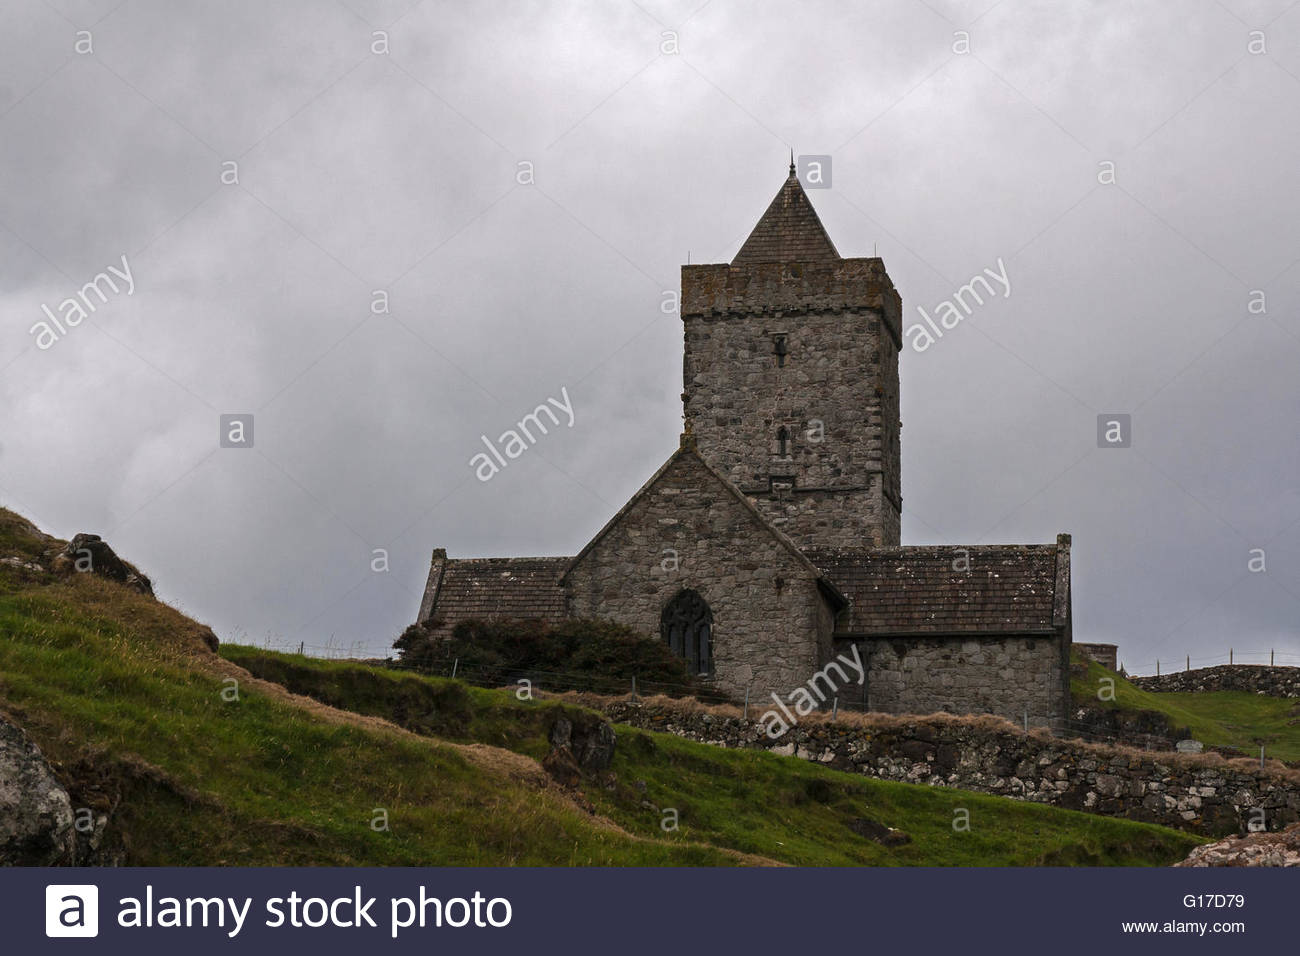 Nice Images Collection: St Clement's Church, Rodel Desktop Wallpapers